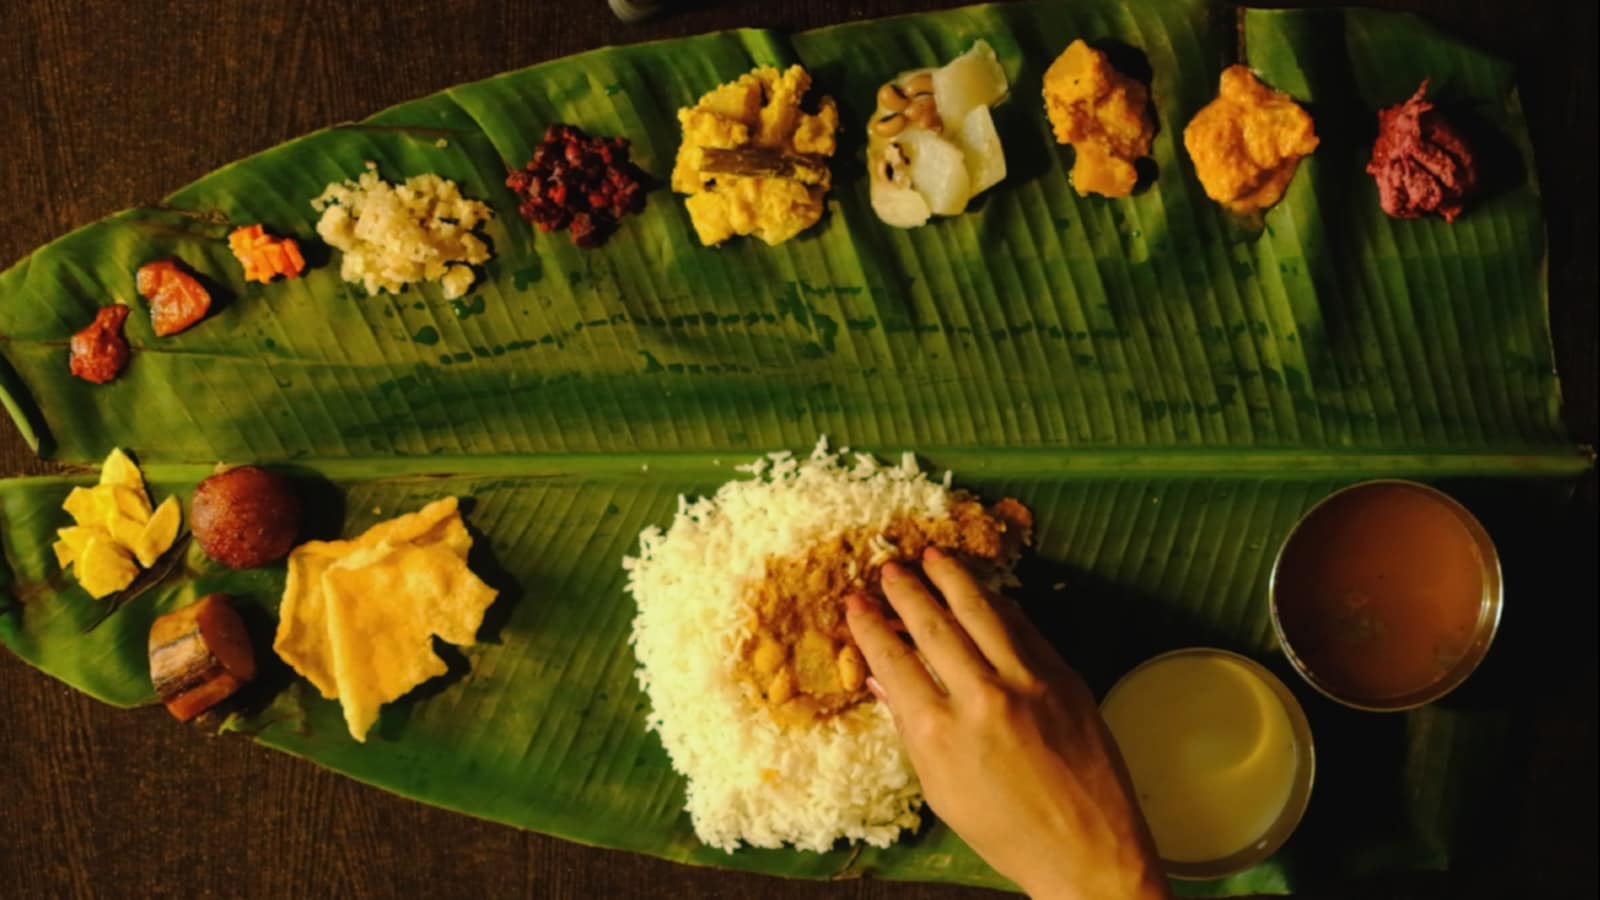 Onam Sadhya: What to expect on the plate, in what order and where ...